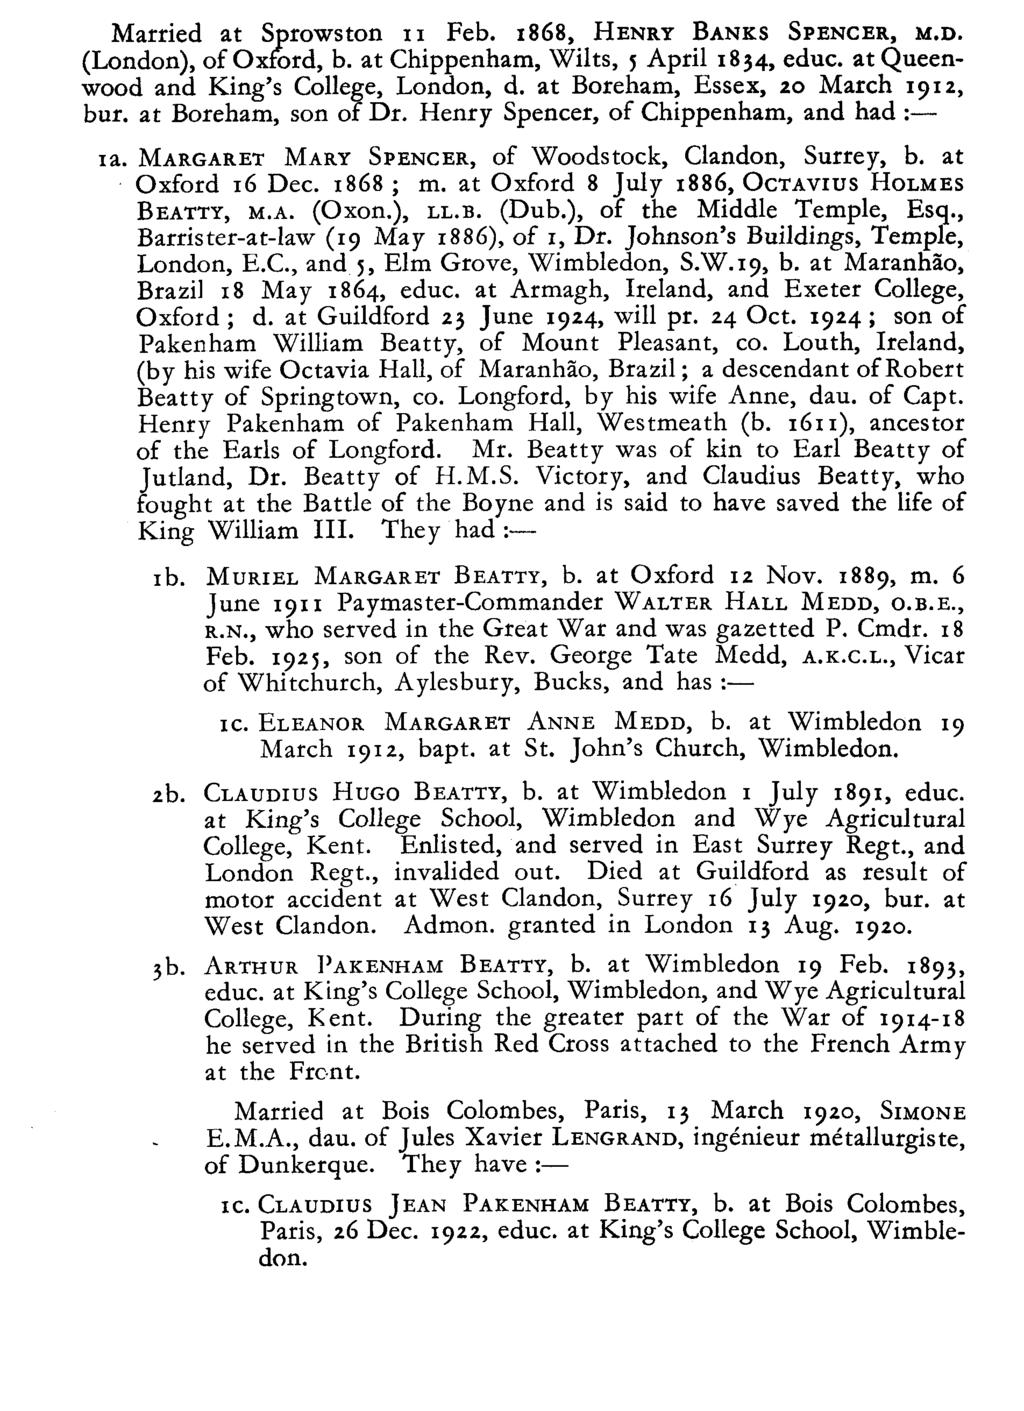 Married at S rowston Feb. 1868, HENRY BANKS SPENCER, M.D. (London), of Ox i! ord, b. at Chippenham, Wilts, 5 April 1834, educ. at Queenwood and King's Colle e, London, d.